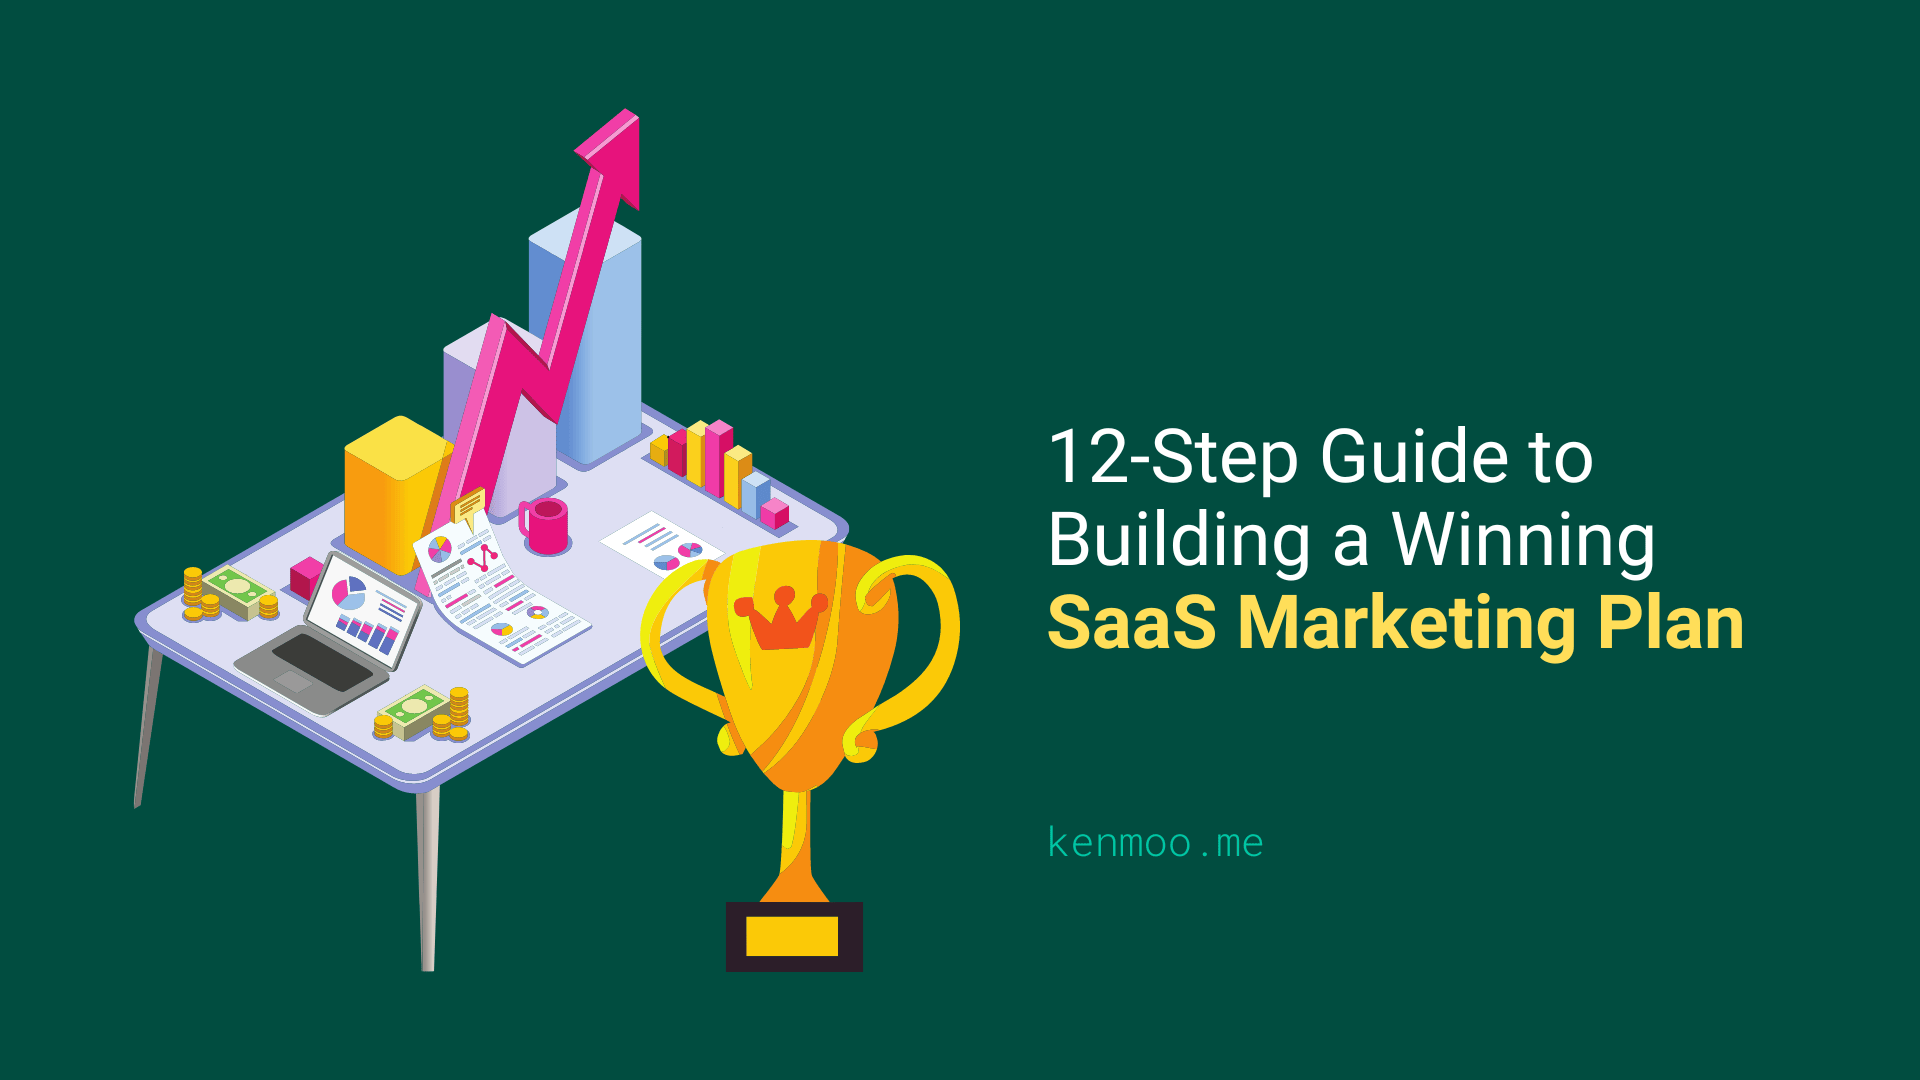 12-Step Guide to Building a Winning SaaS Marketing Plan